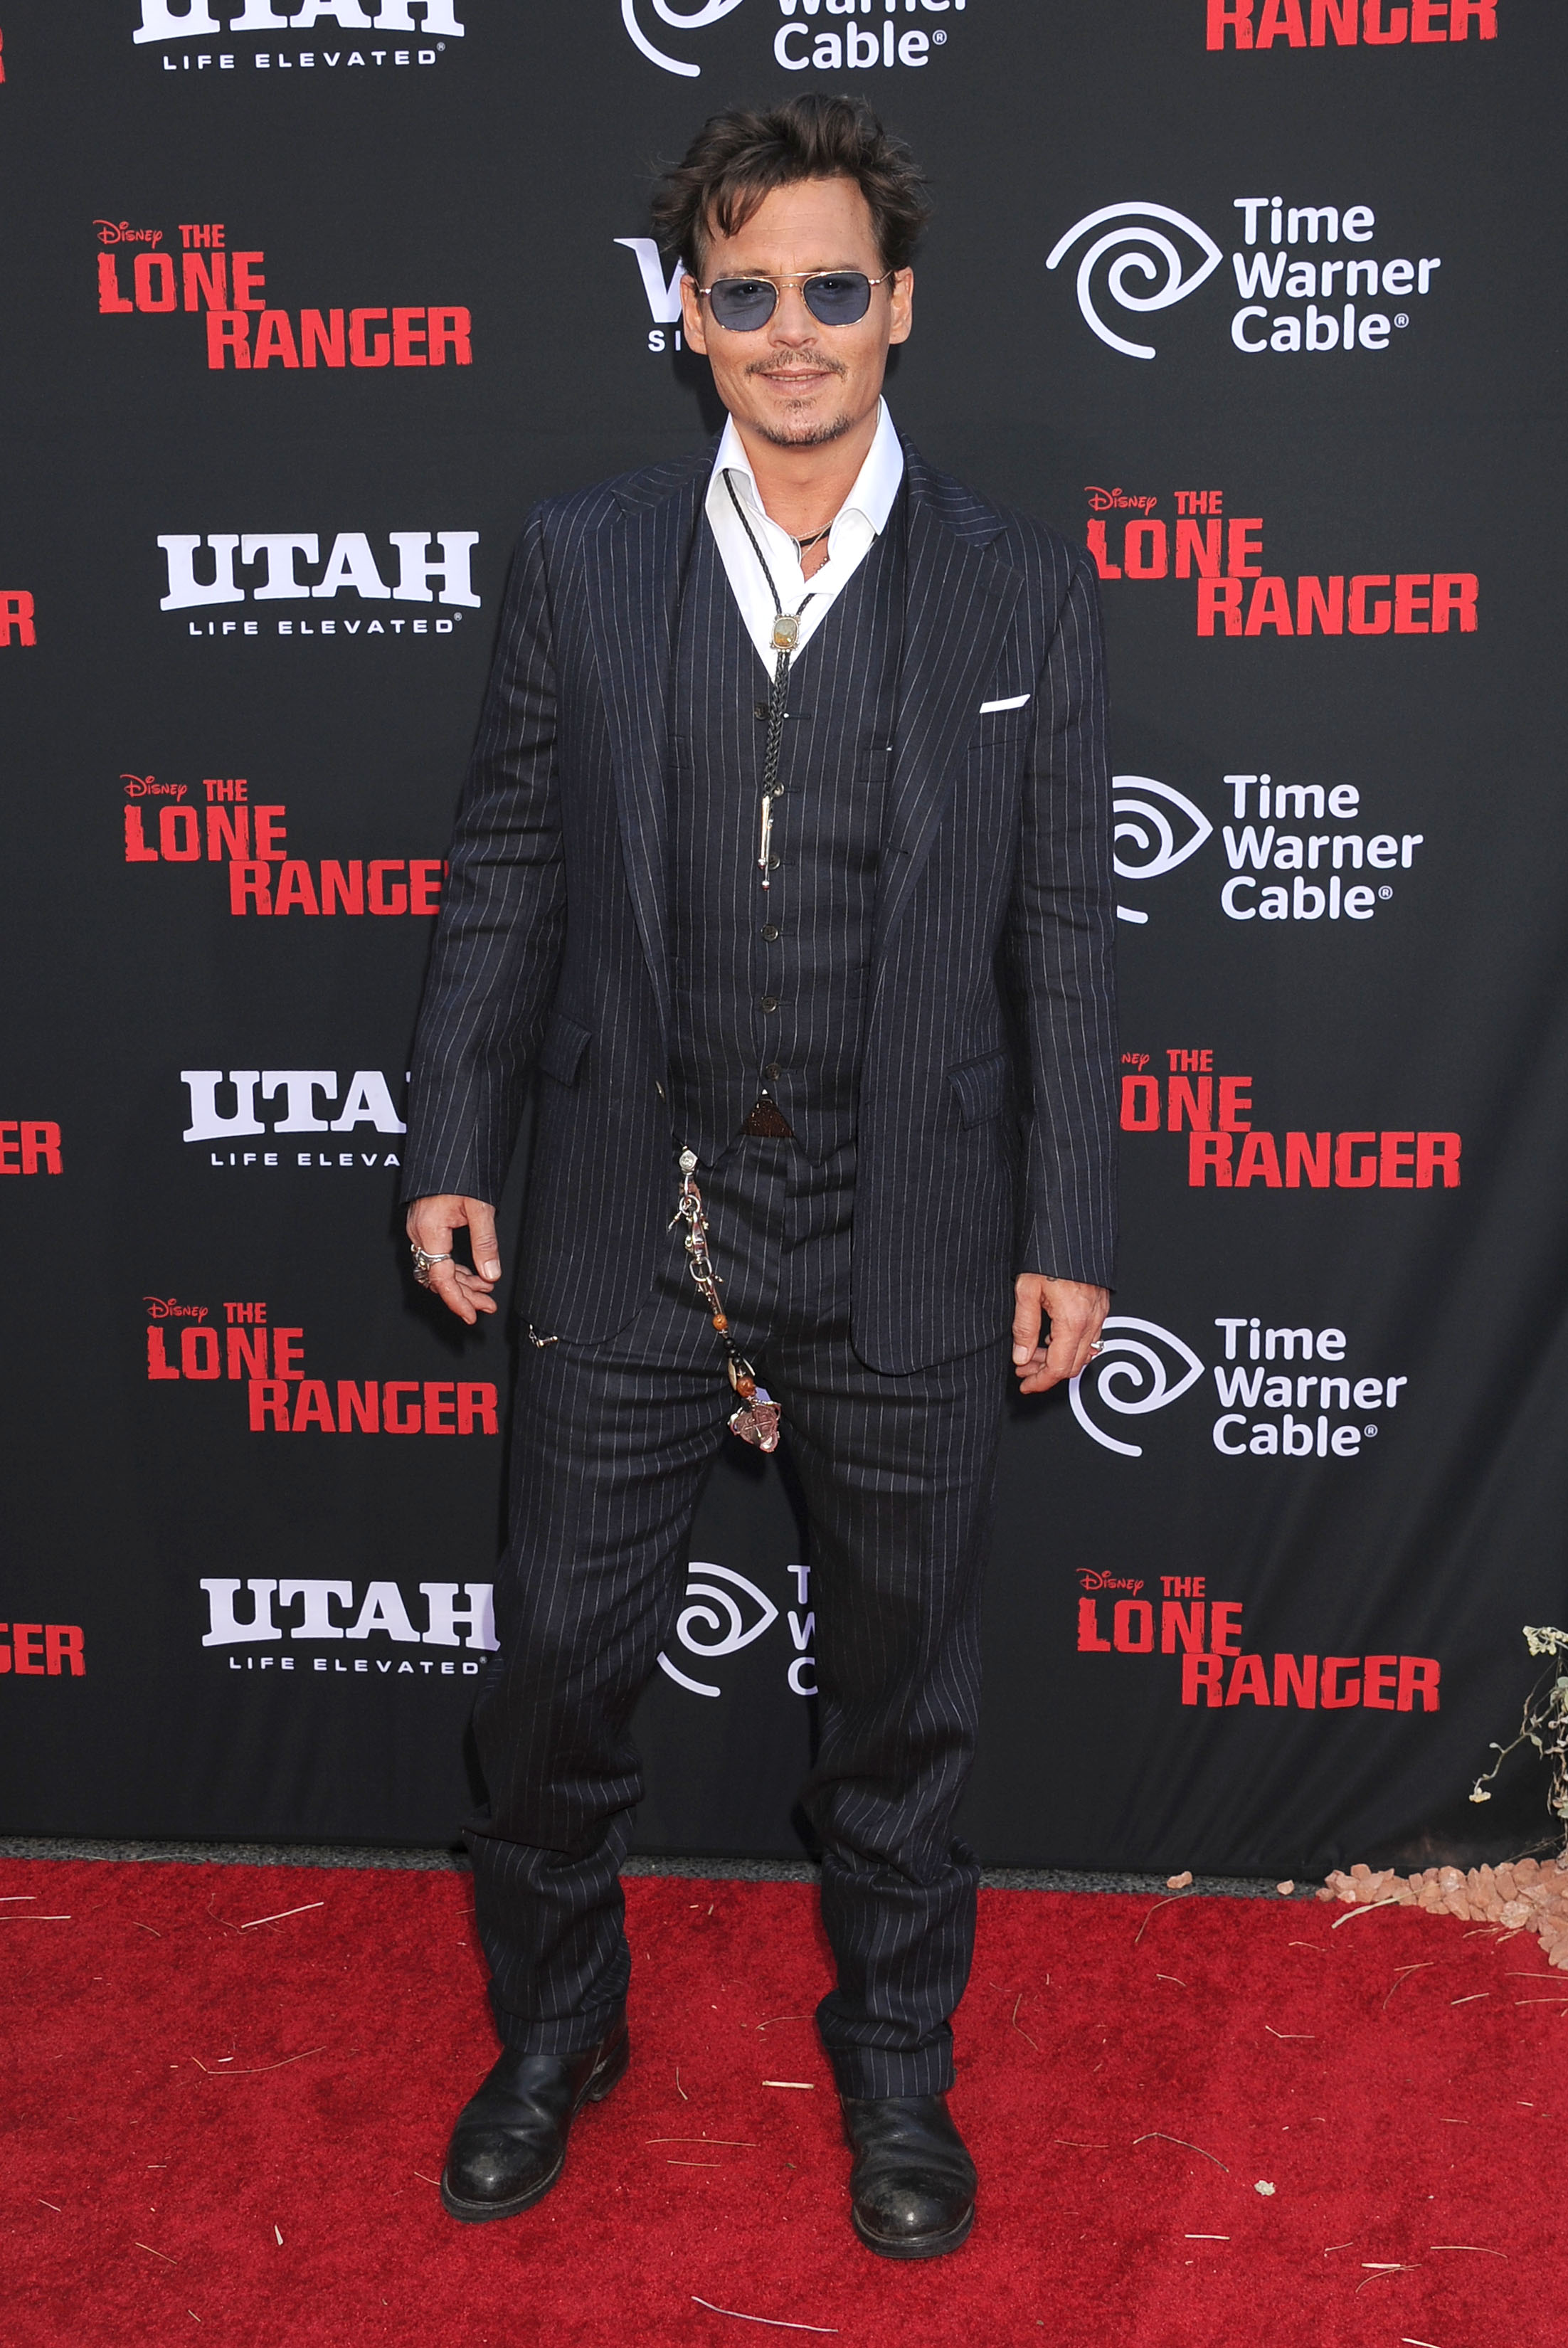 Johnny Depp at the world premiere of "The Lone Ranger" in Anaheim, California on June 22, 2013 | Source: Getty Images